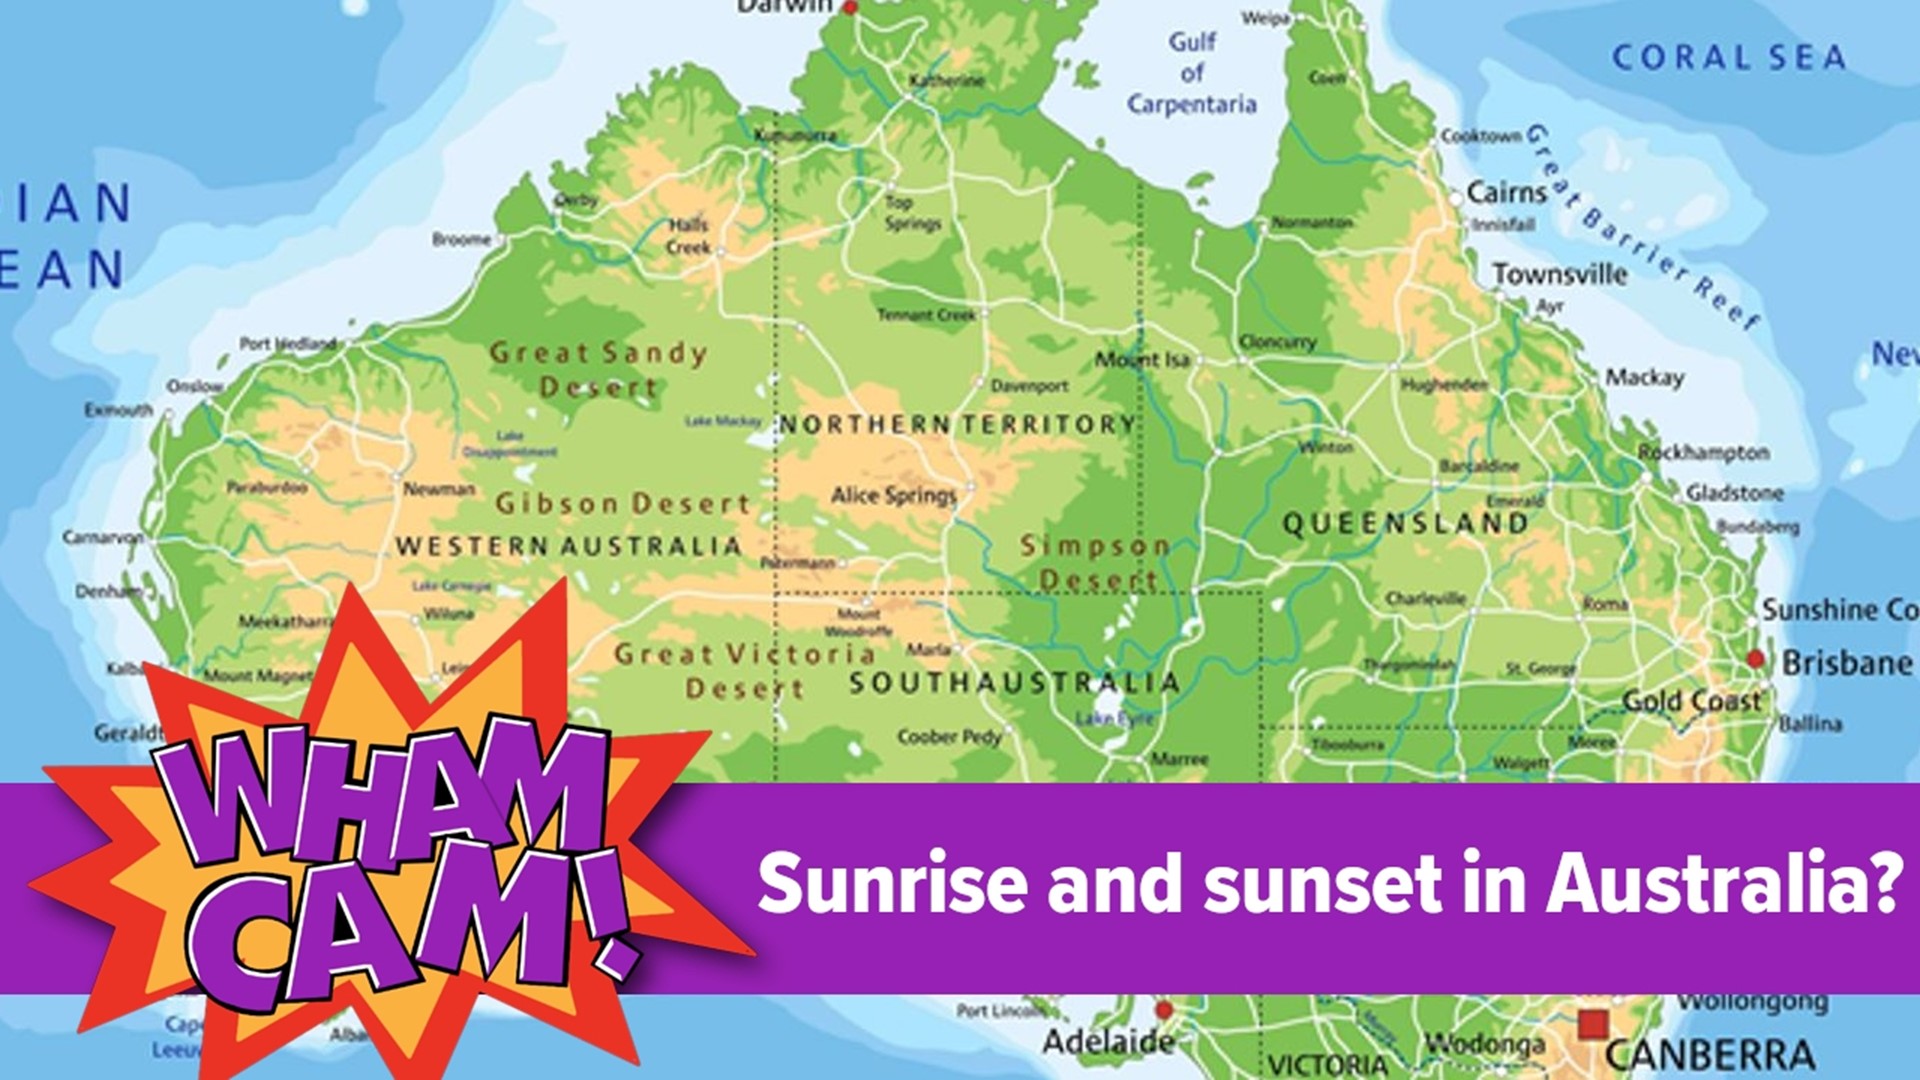 Now that the summer solstice is here, Joe's wondering what time sunrise and sunset are in Australia. He headed to Moosic to see if anyone there had the answer.